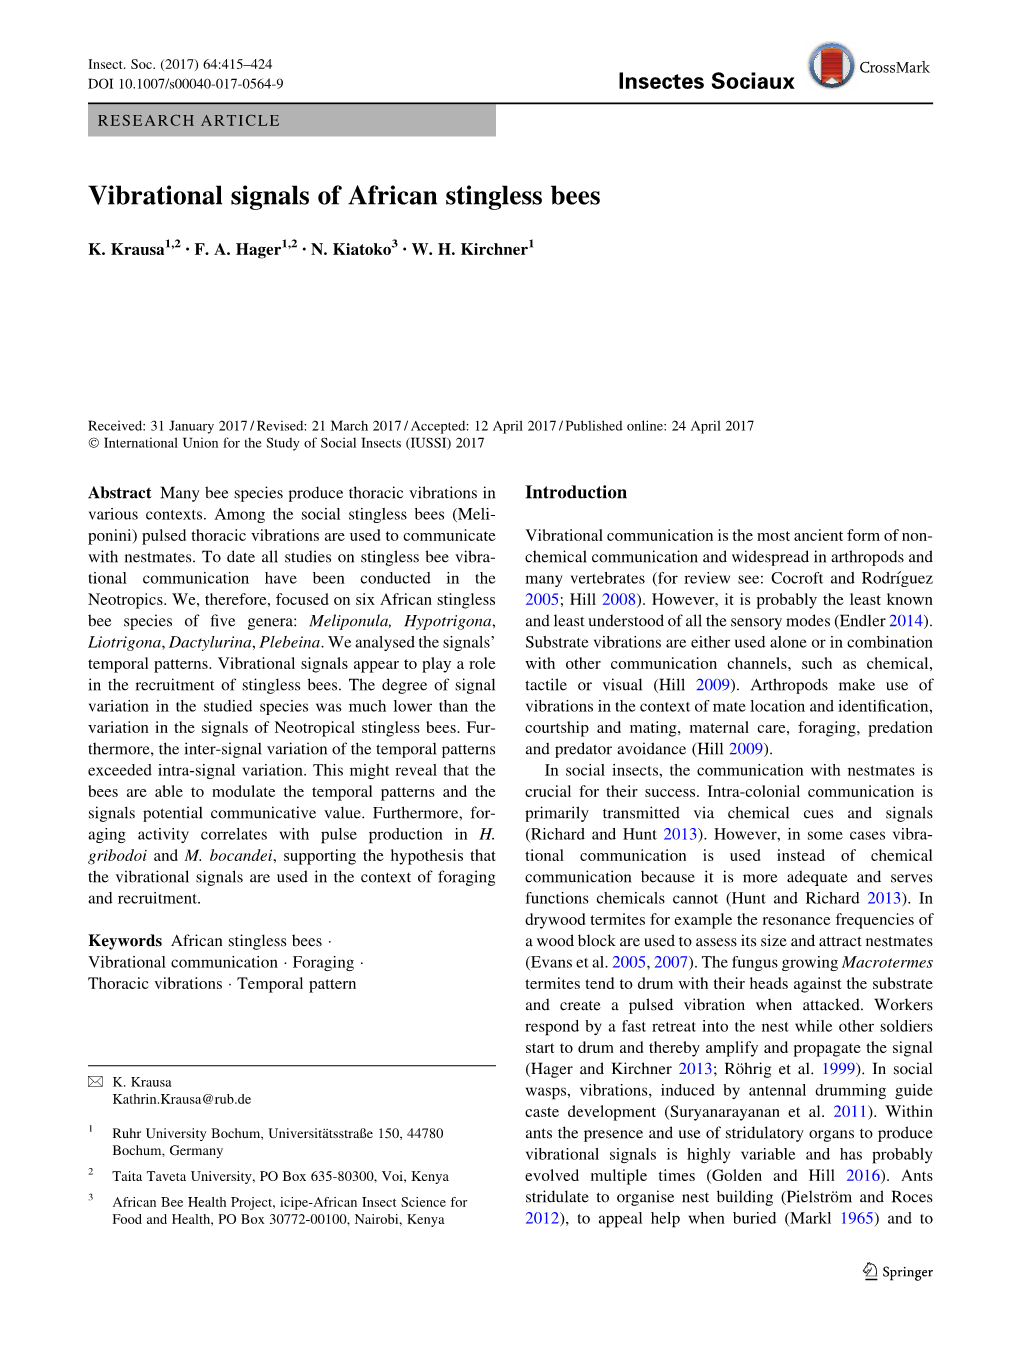 Vibrational Signals of African Stingless Bees